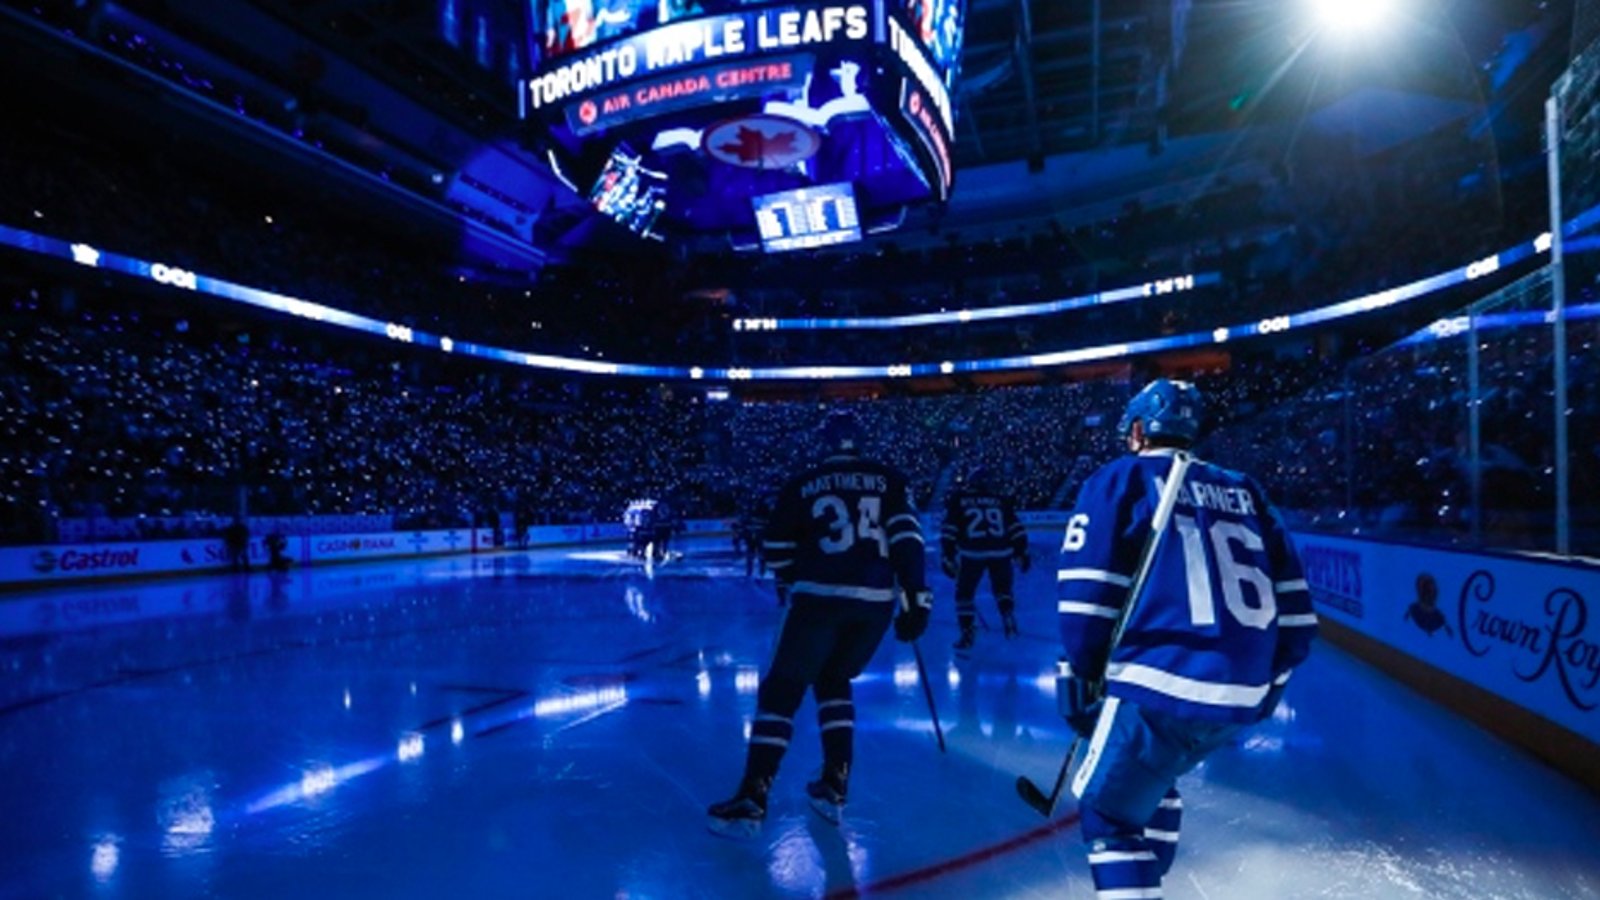 Report: Toronto could still host the Stanley Cup Final